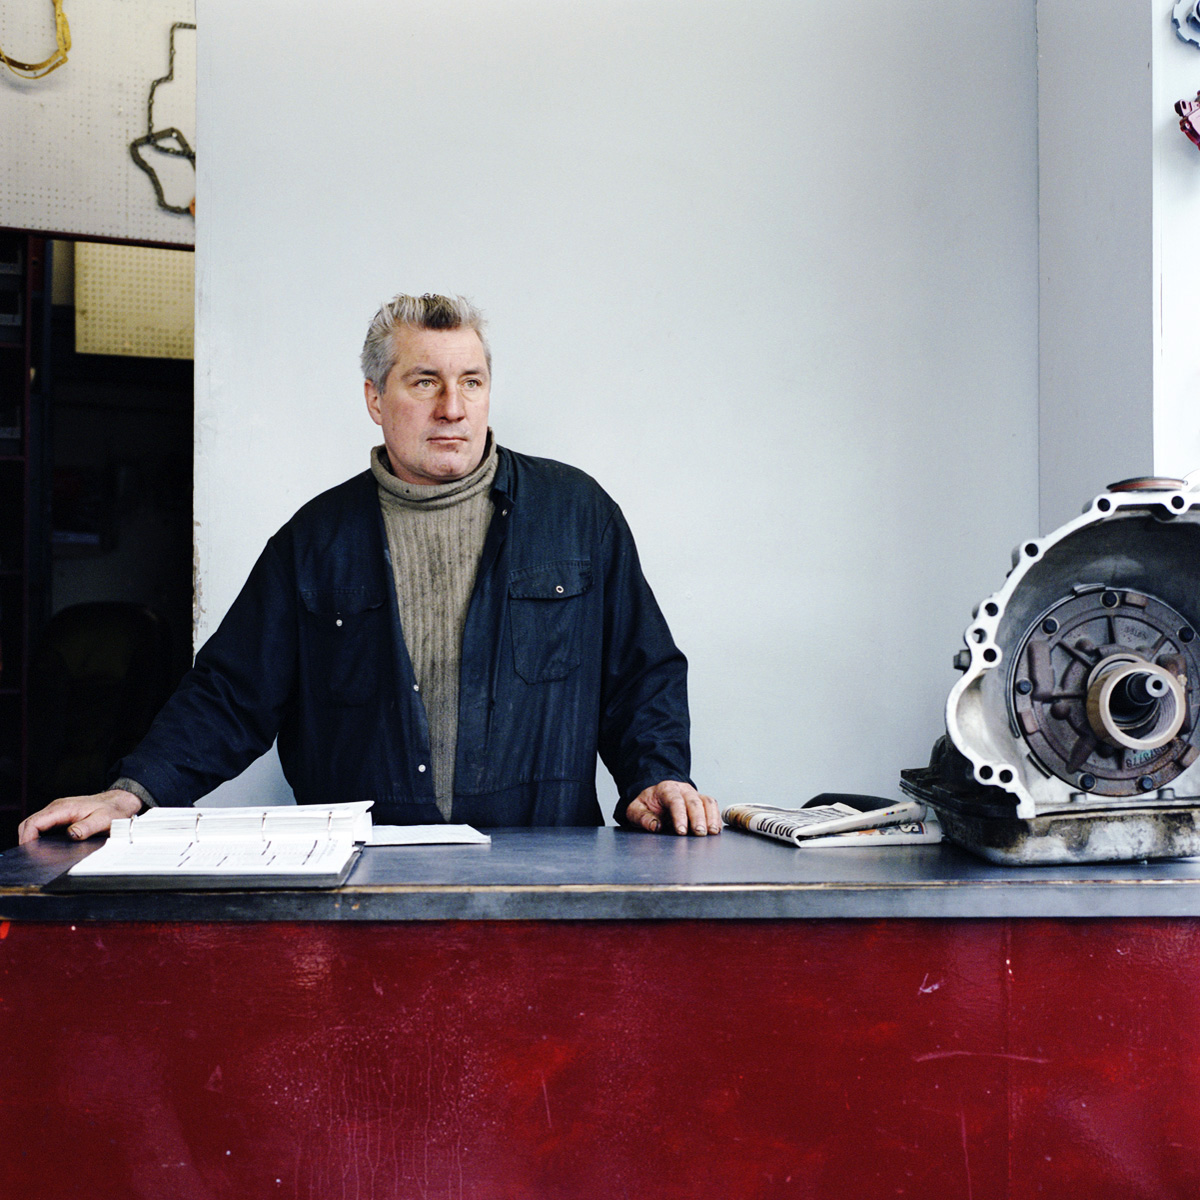 Harry Moran is a mechanic at Hornsey Automatic Transmissions Ltd.Mtier, 2013